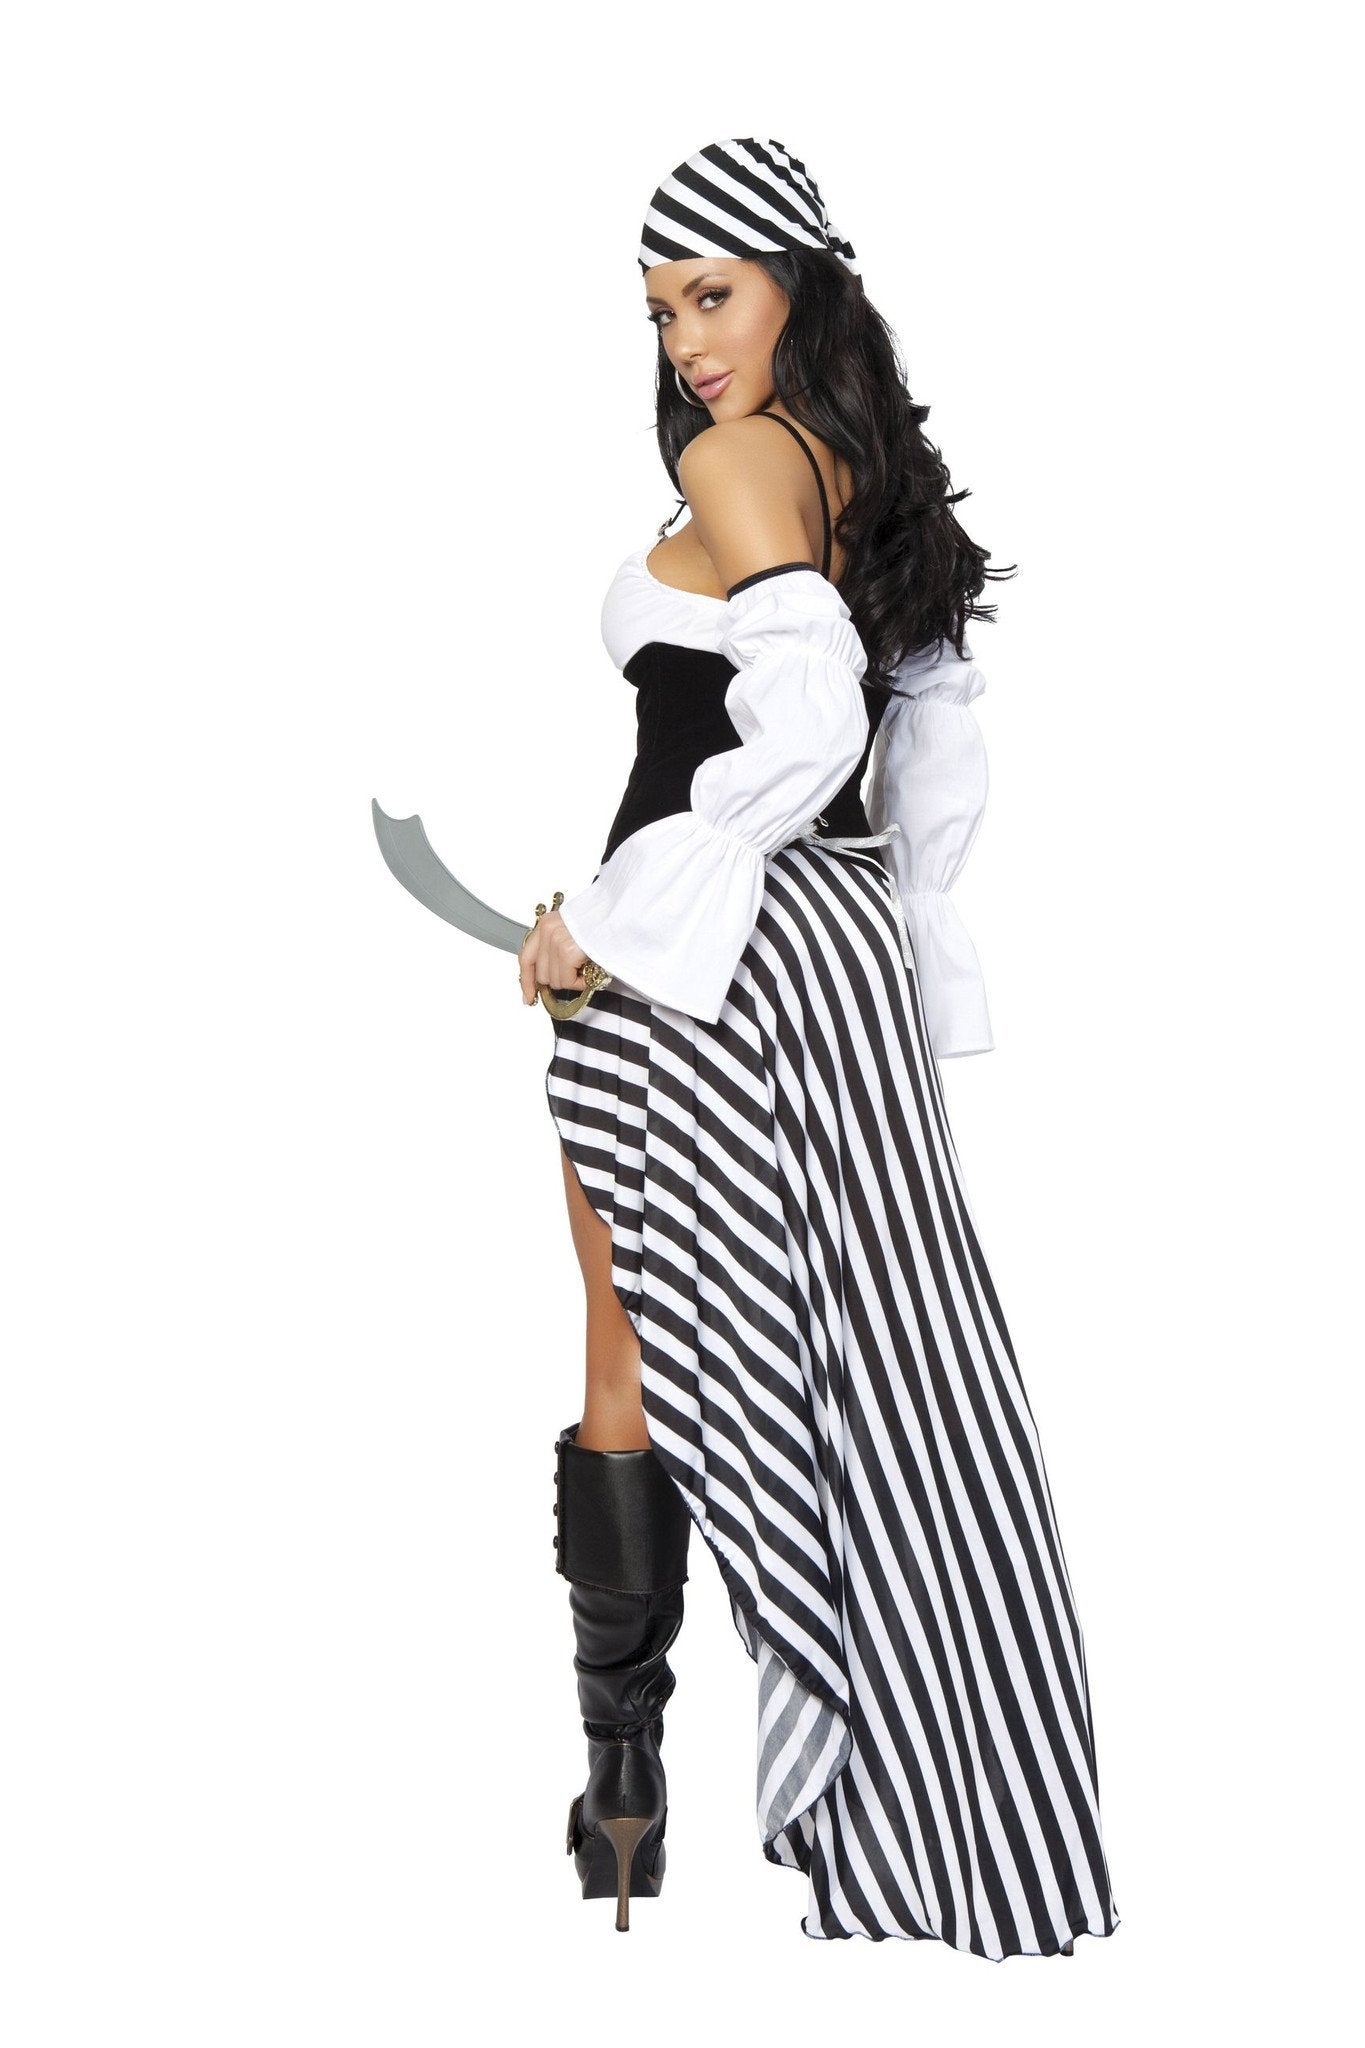 Buy 6pc Pirate Lass from RomaRetailShop for 78.99 with Same Day Shipping Designed by Roma Costume 4244-AS-S